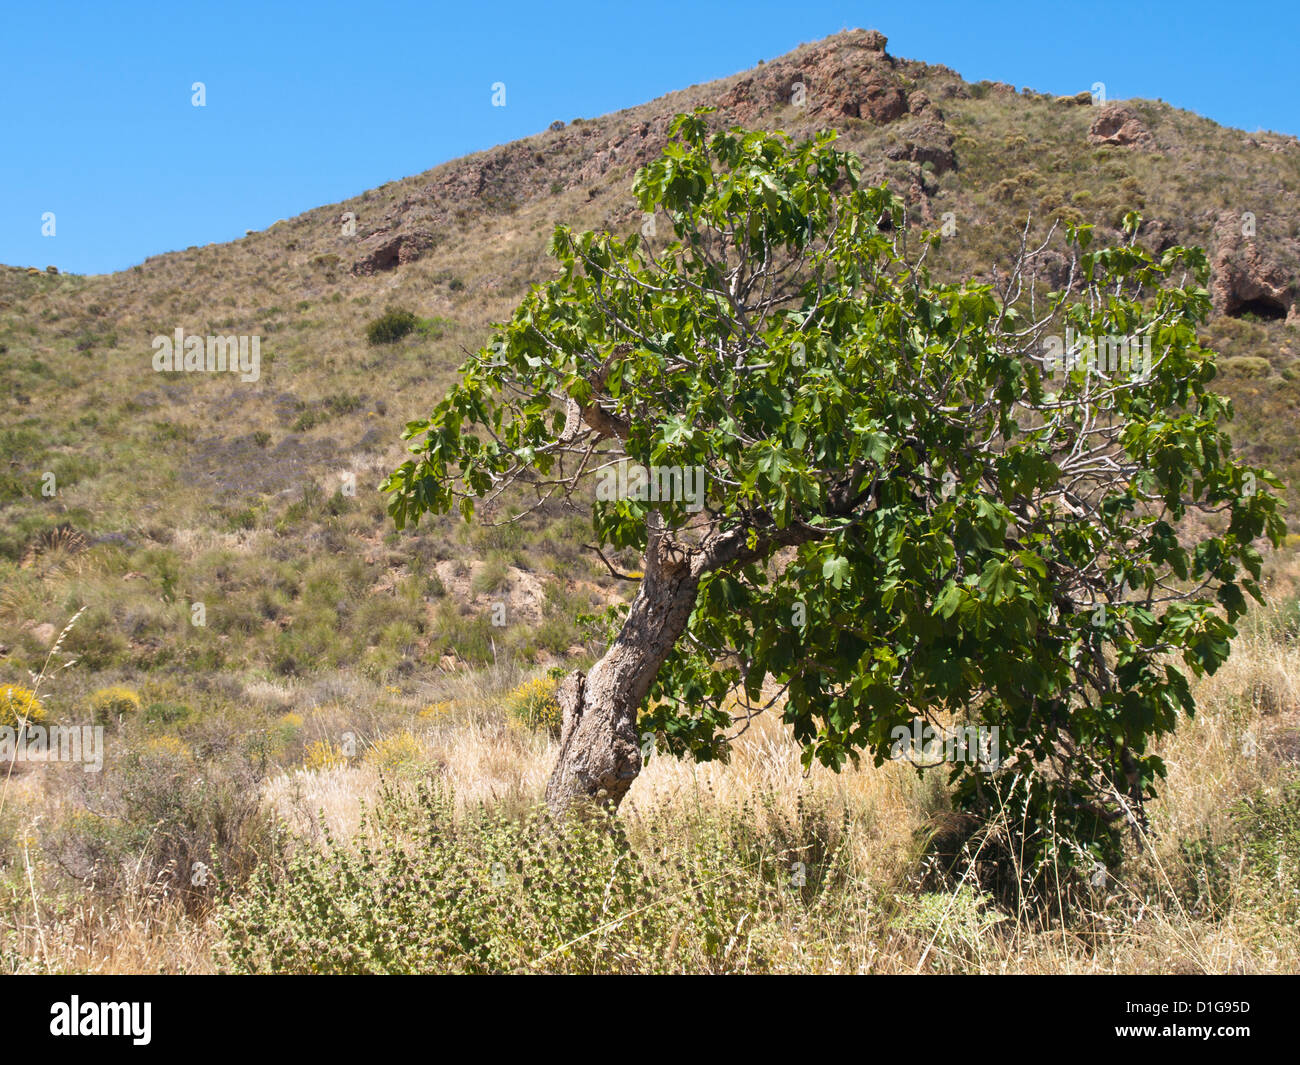 The common fig, Ficus carica,tree growing in the dry arid countryside of Murcia Spain Stock Photo